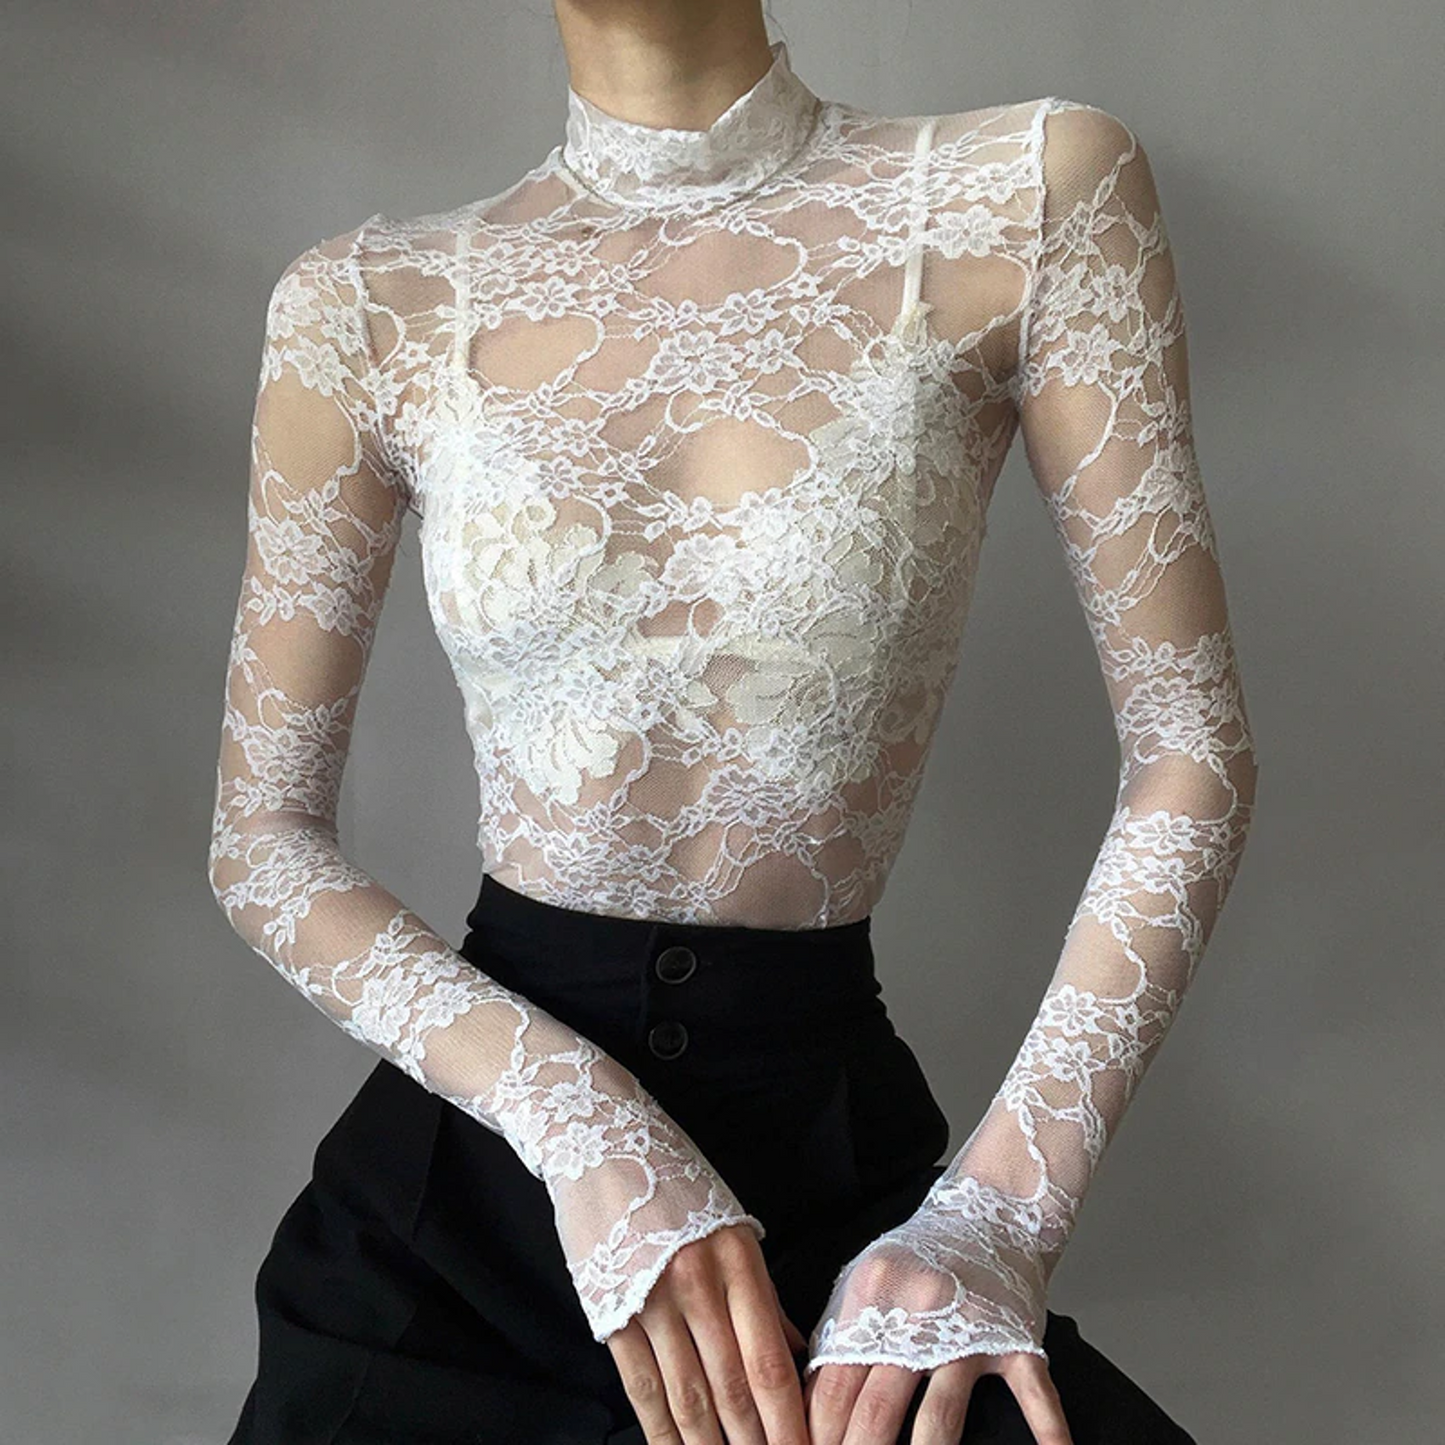 Turtleneck See Through Lace Blouse